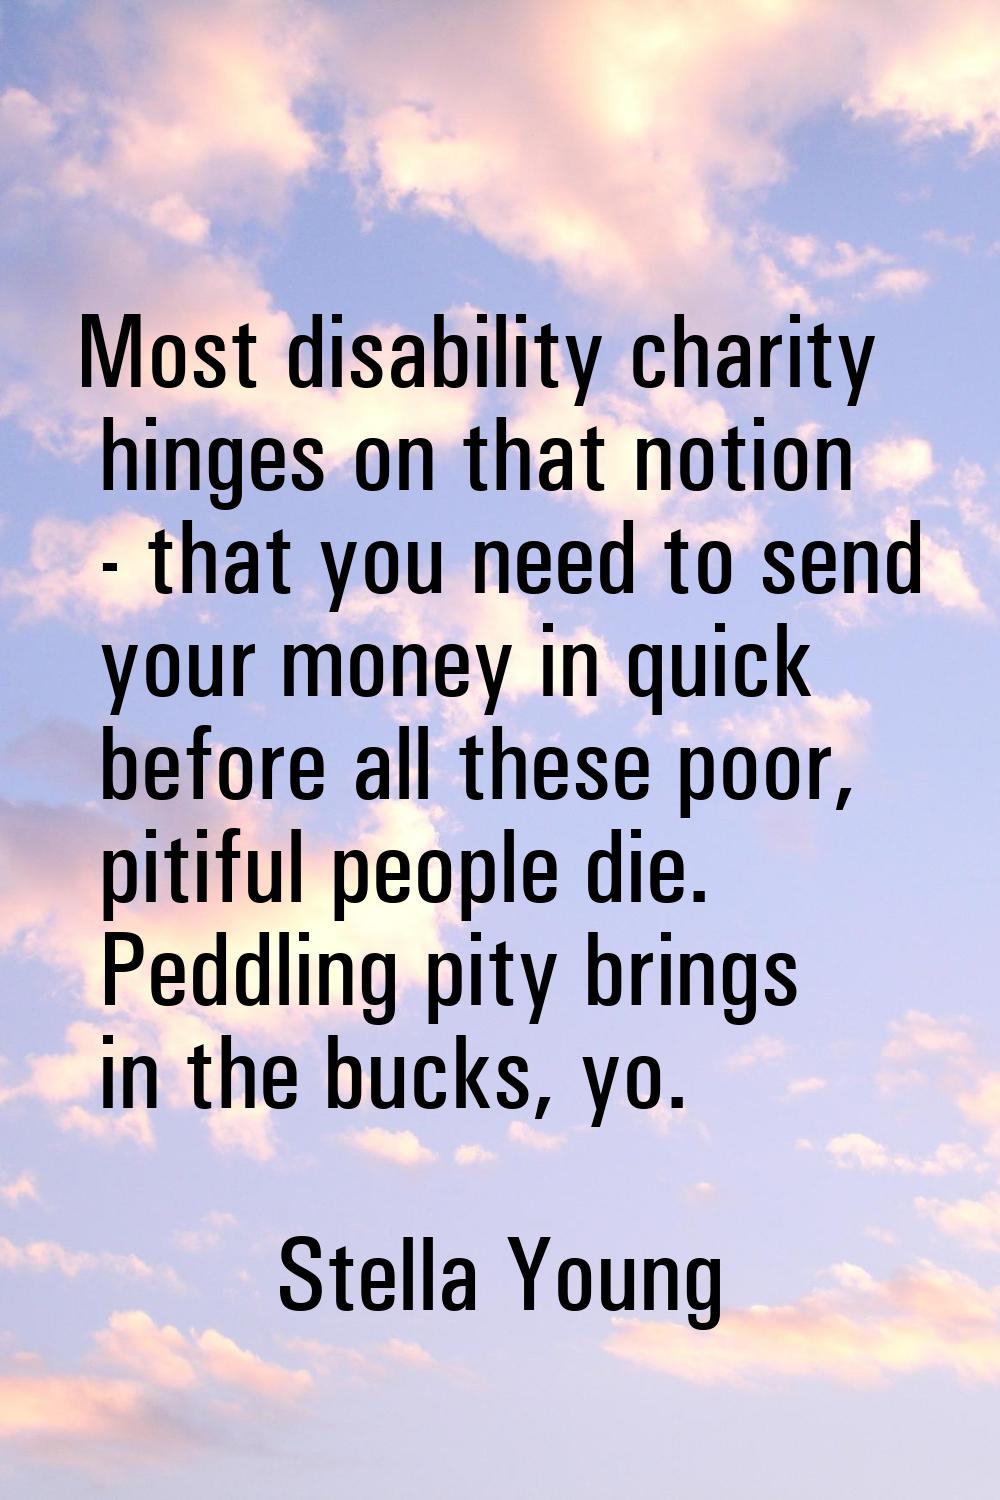 Most disability charity hinges on that notion - that you need to send your money in quick before al